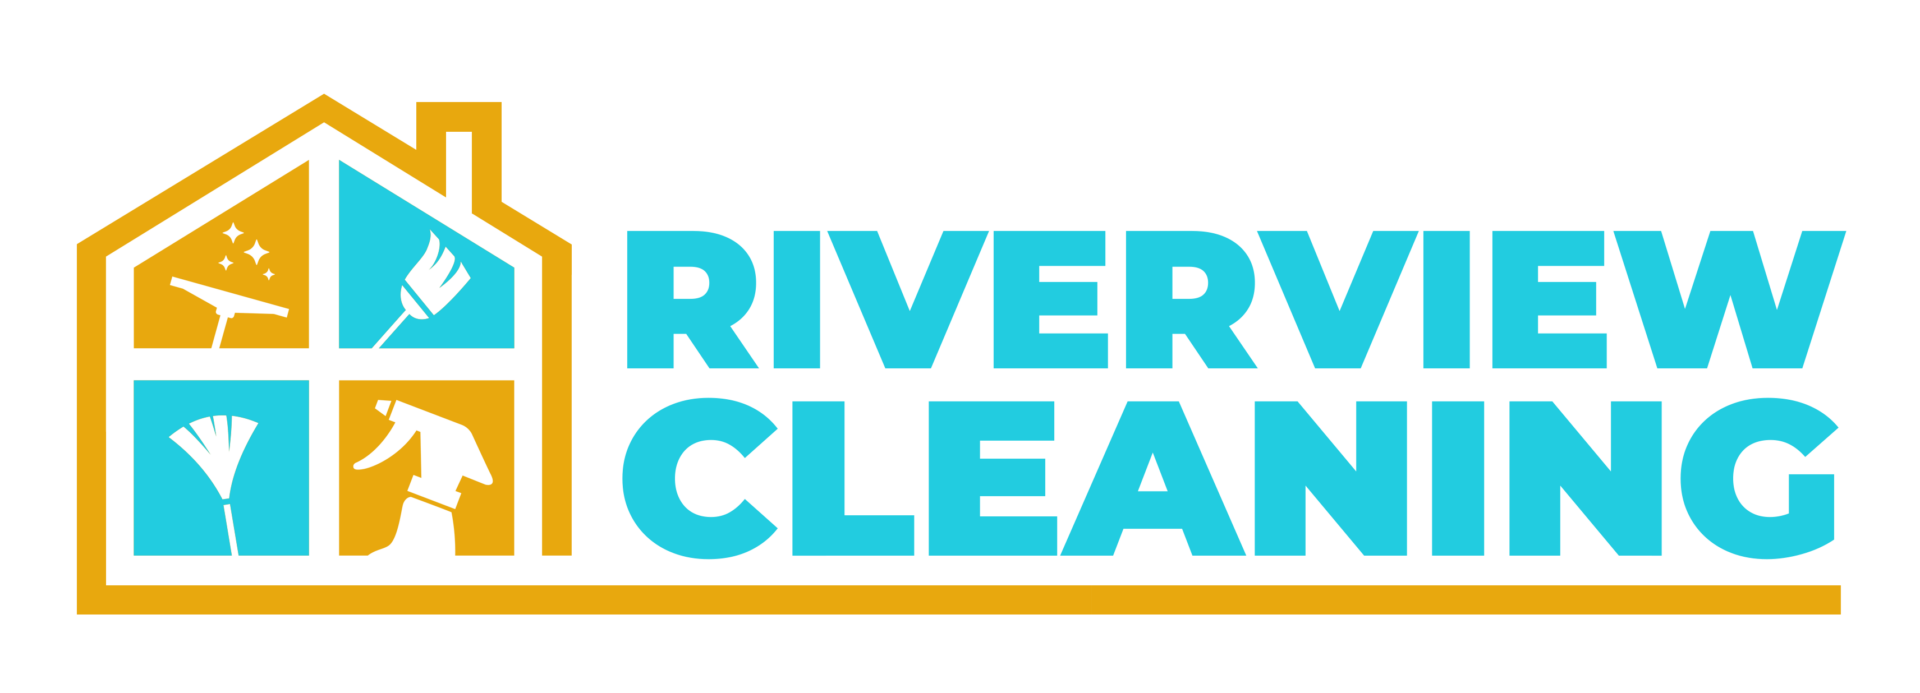 Riverview Cleaning offers professional maid service and home cleaning near Phoenix. Our logo reflects our expertise as top-rated house cleaners in the area.